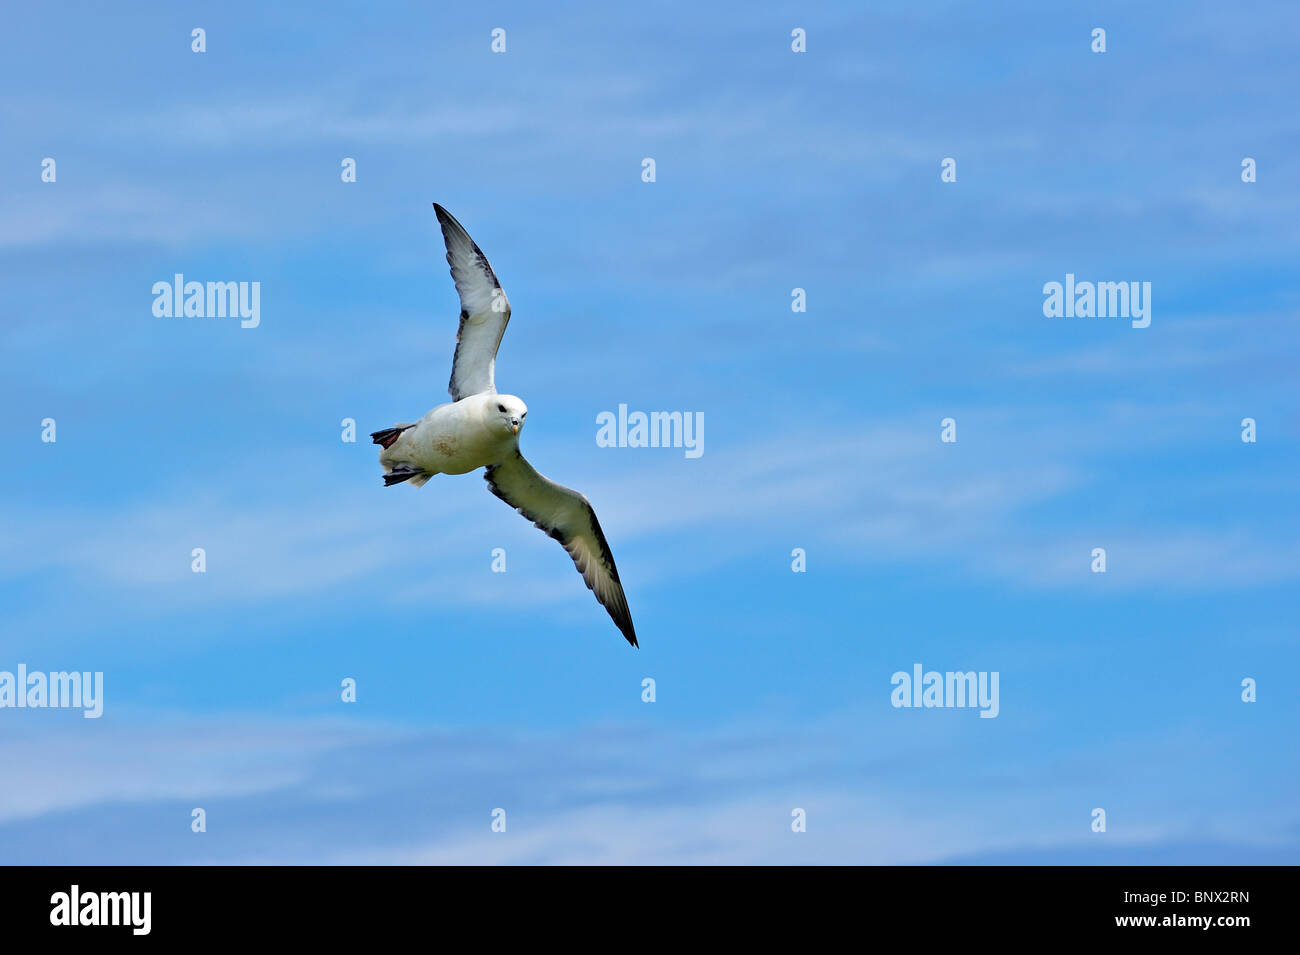 Northern Fulmar / Arctic Fulmar (Fulmarus glacialis) at flight over sea at the Fowlsheugh nature reserve, Scotland, UK Stock Photo